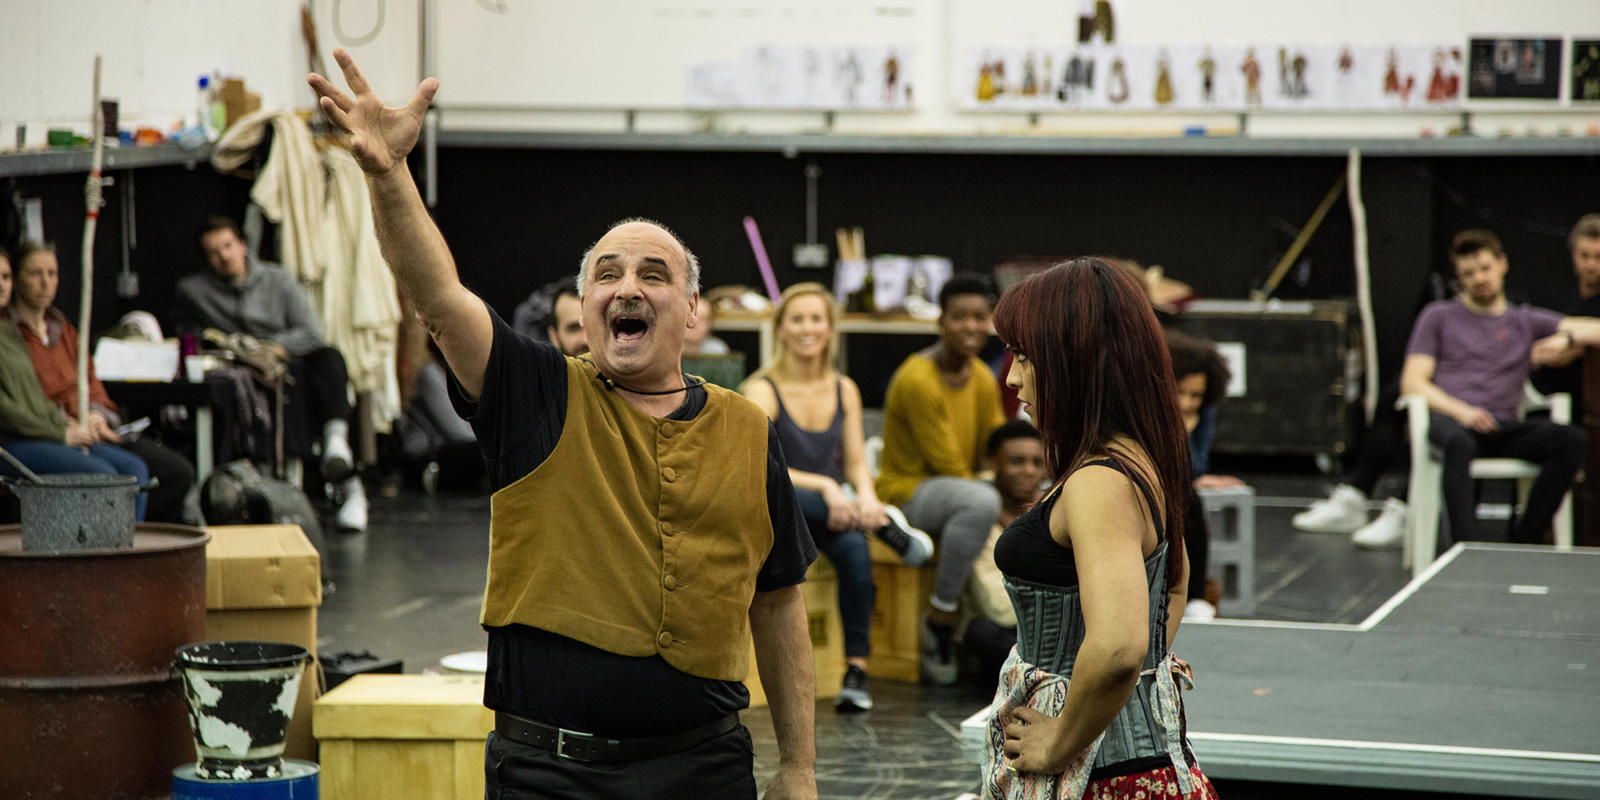 Peter Polycarpou performing with his arm raised with Danielle de Niese and other actors